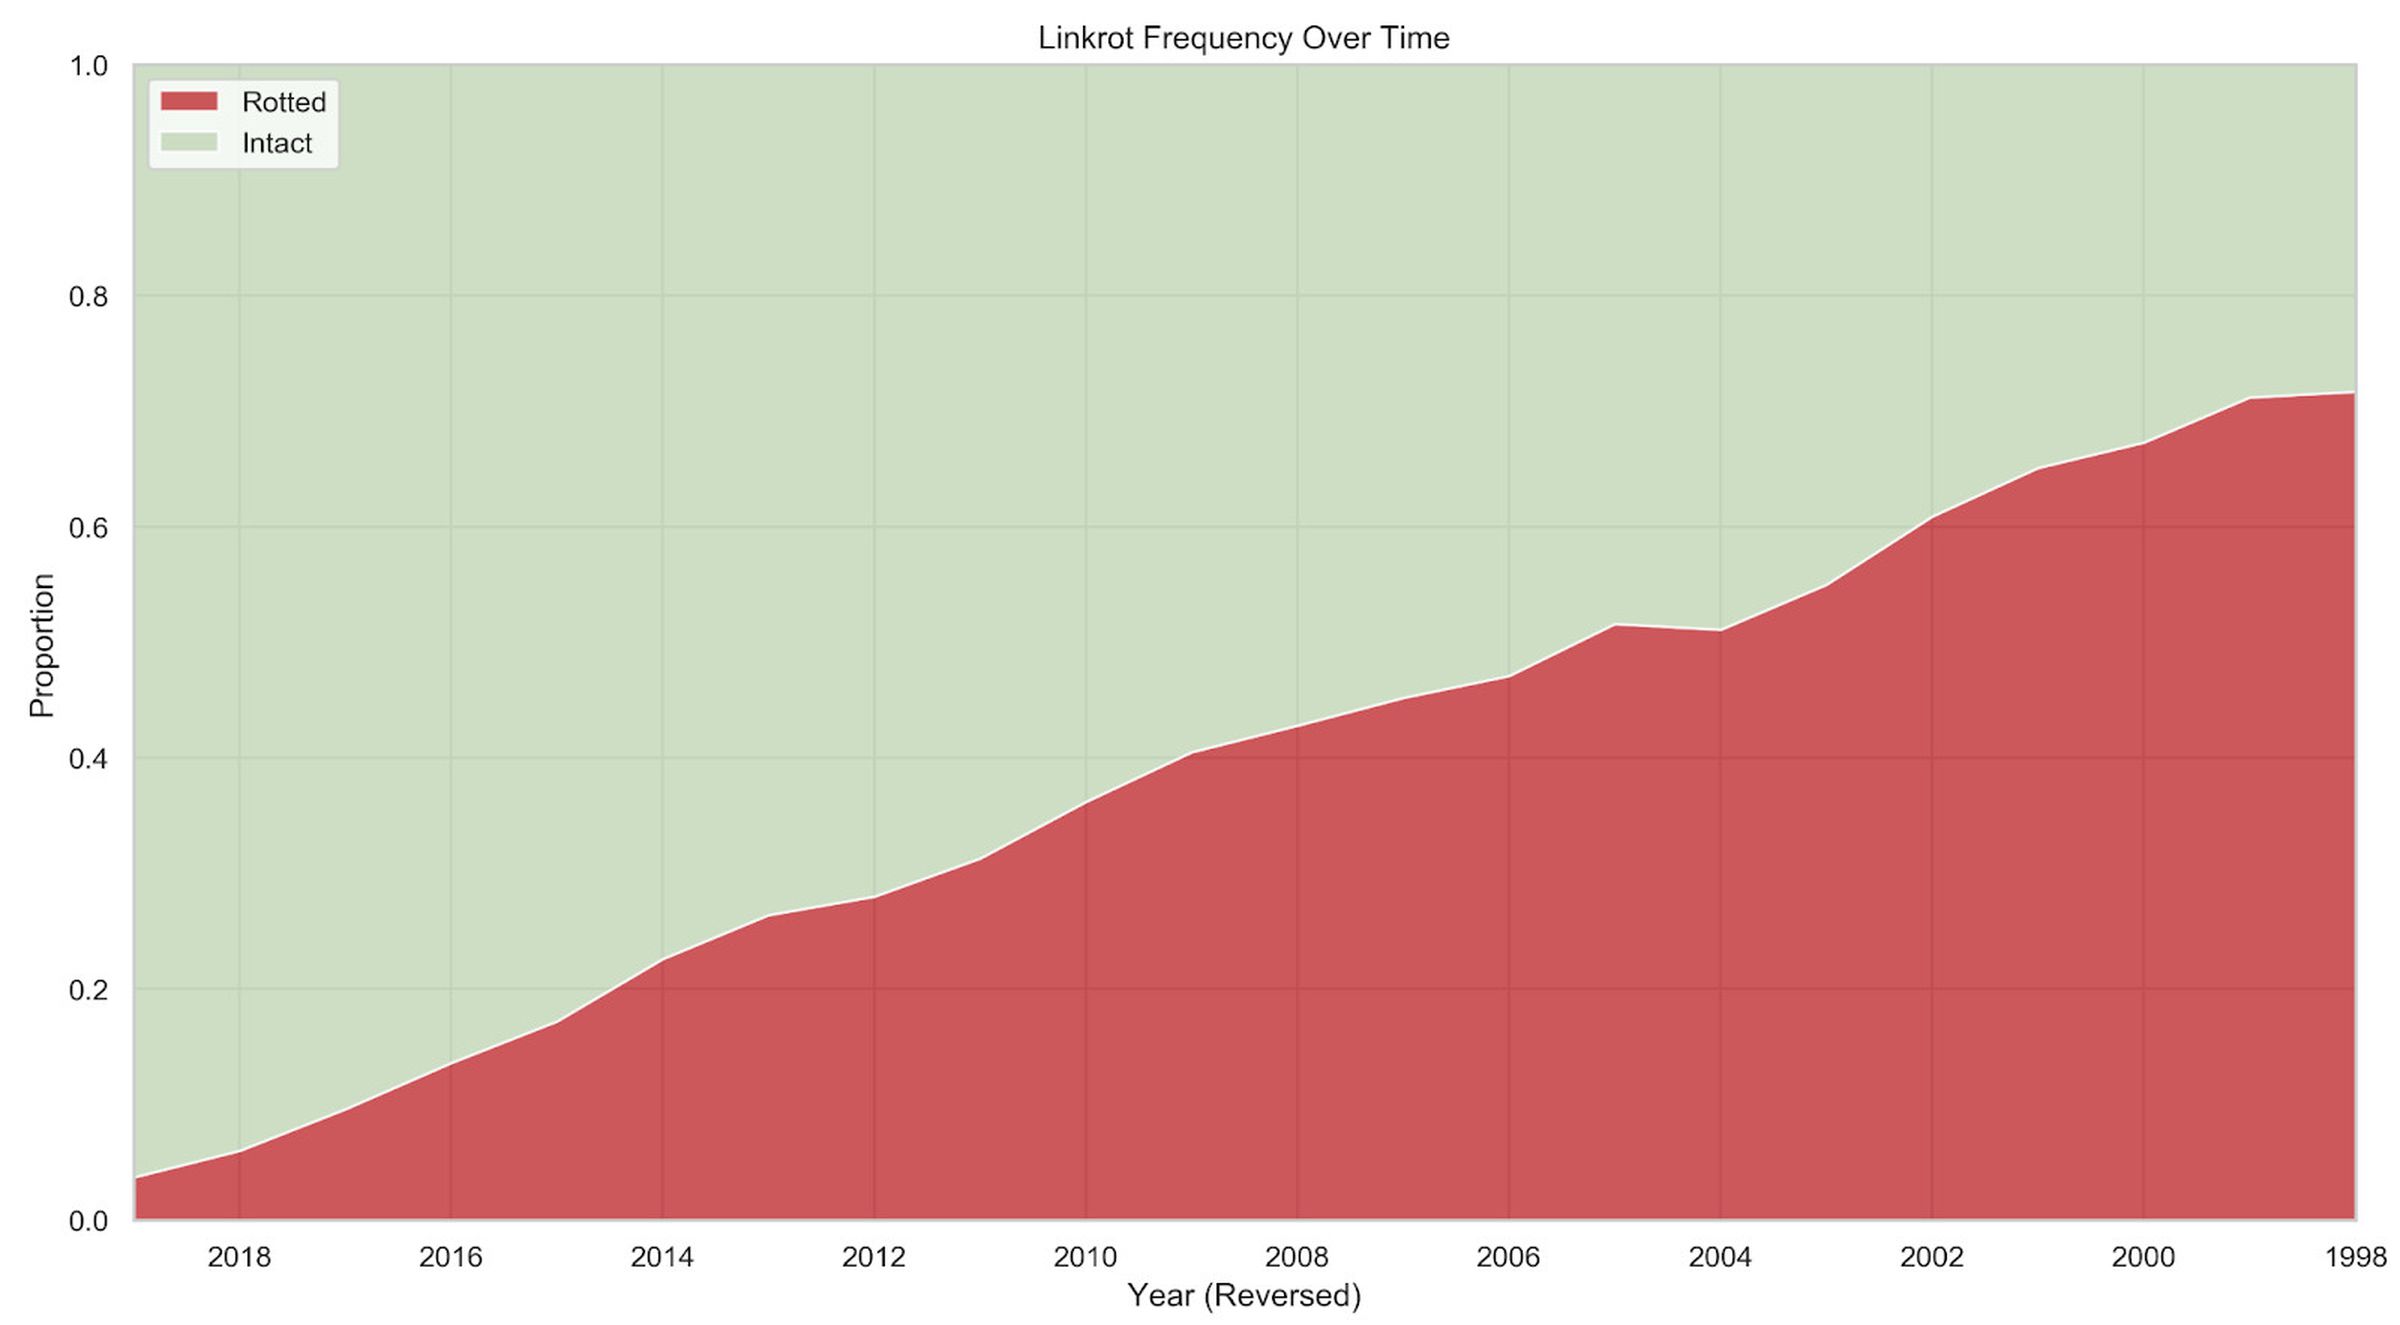 A reverse view of link rot over time.